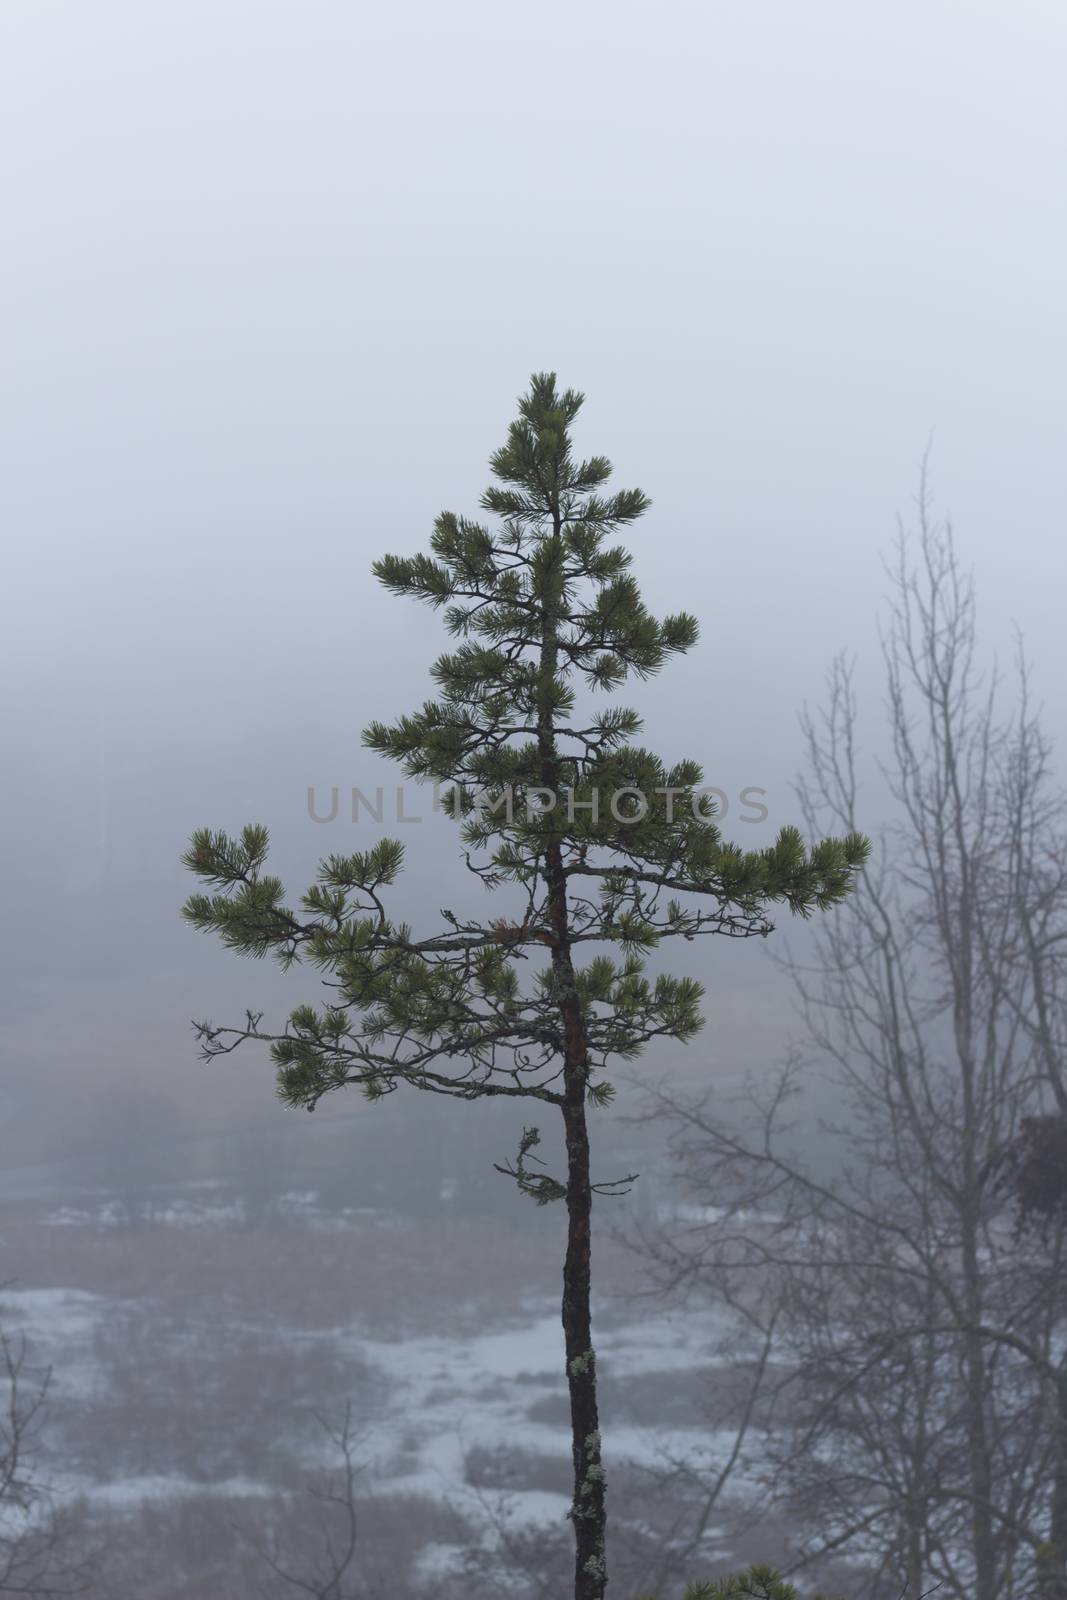 Isolated pine tree on a misty, moody, day. Trees in the distance barely visible. Nackareservatet - nature reserve in Sweden